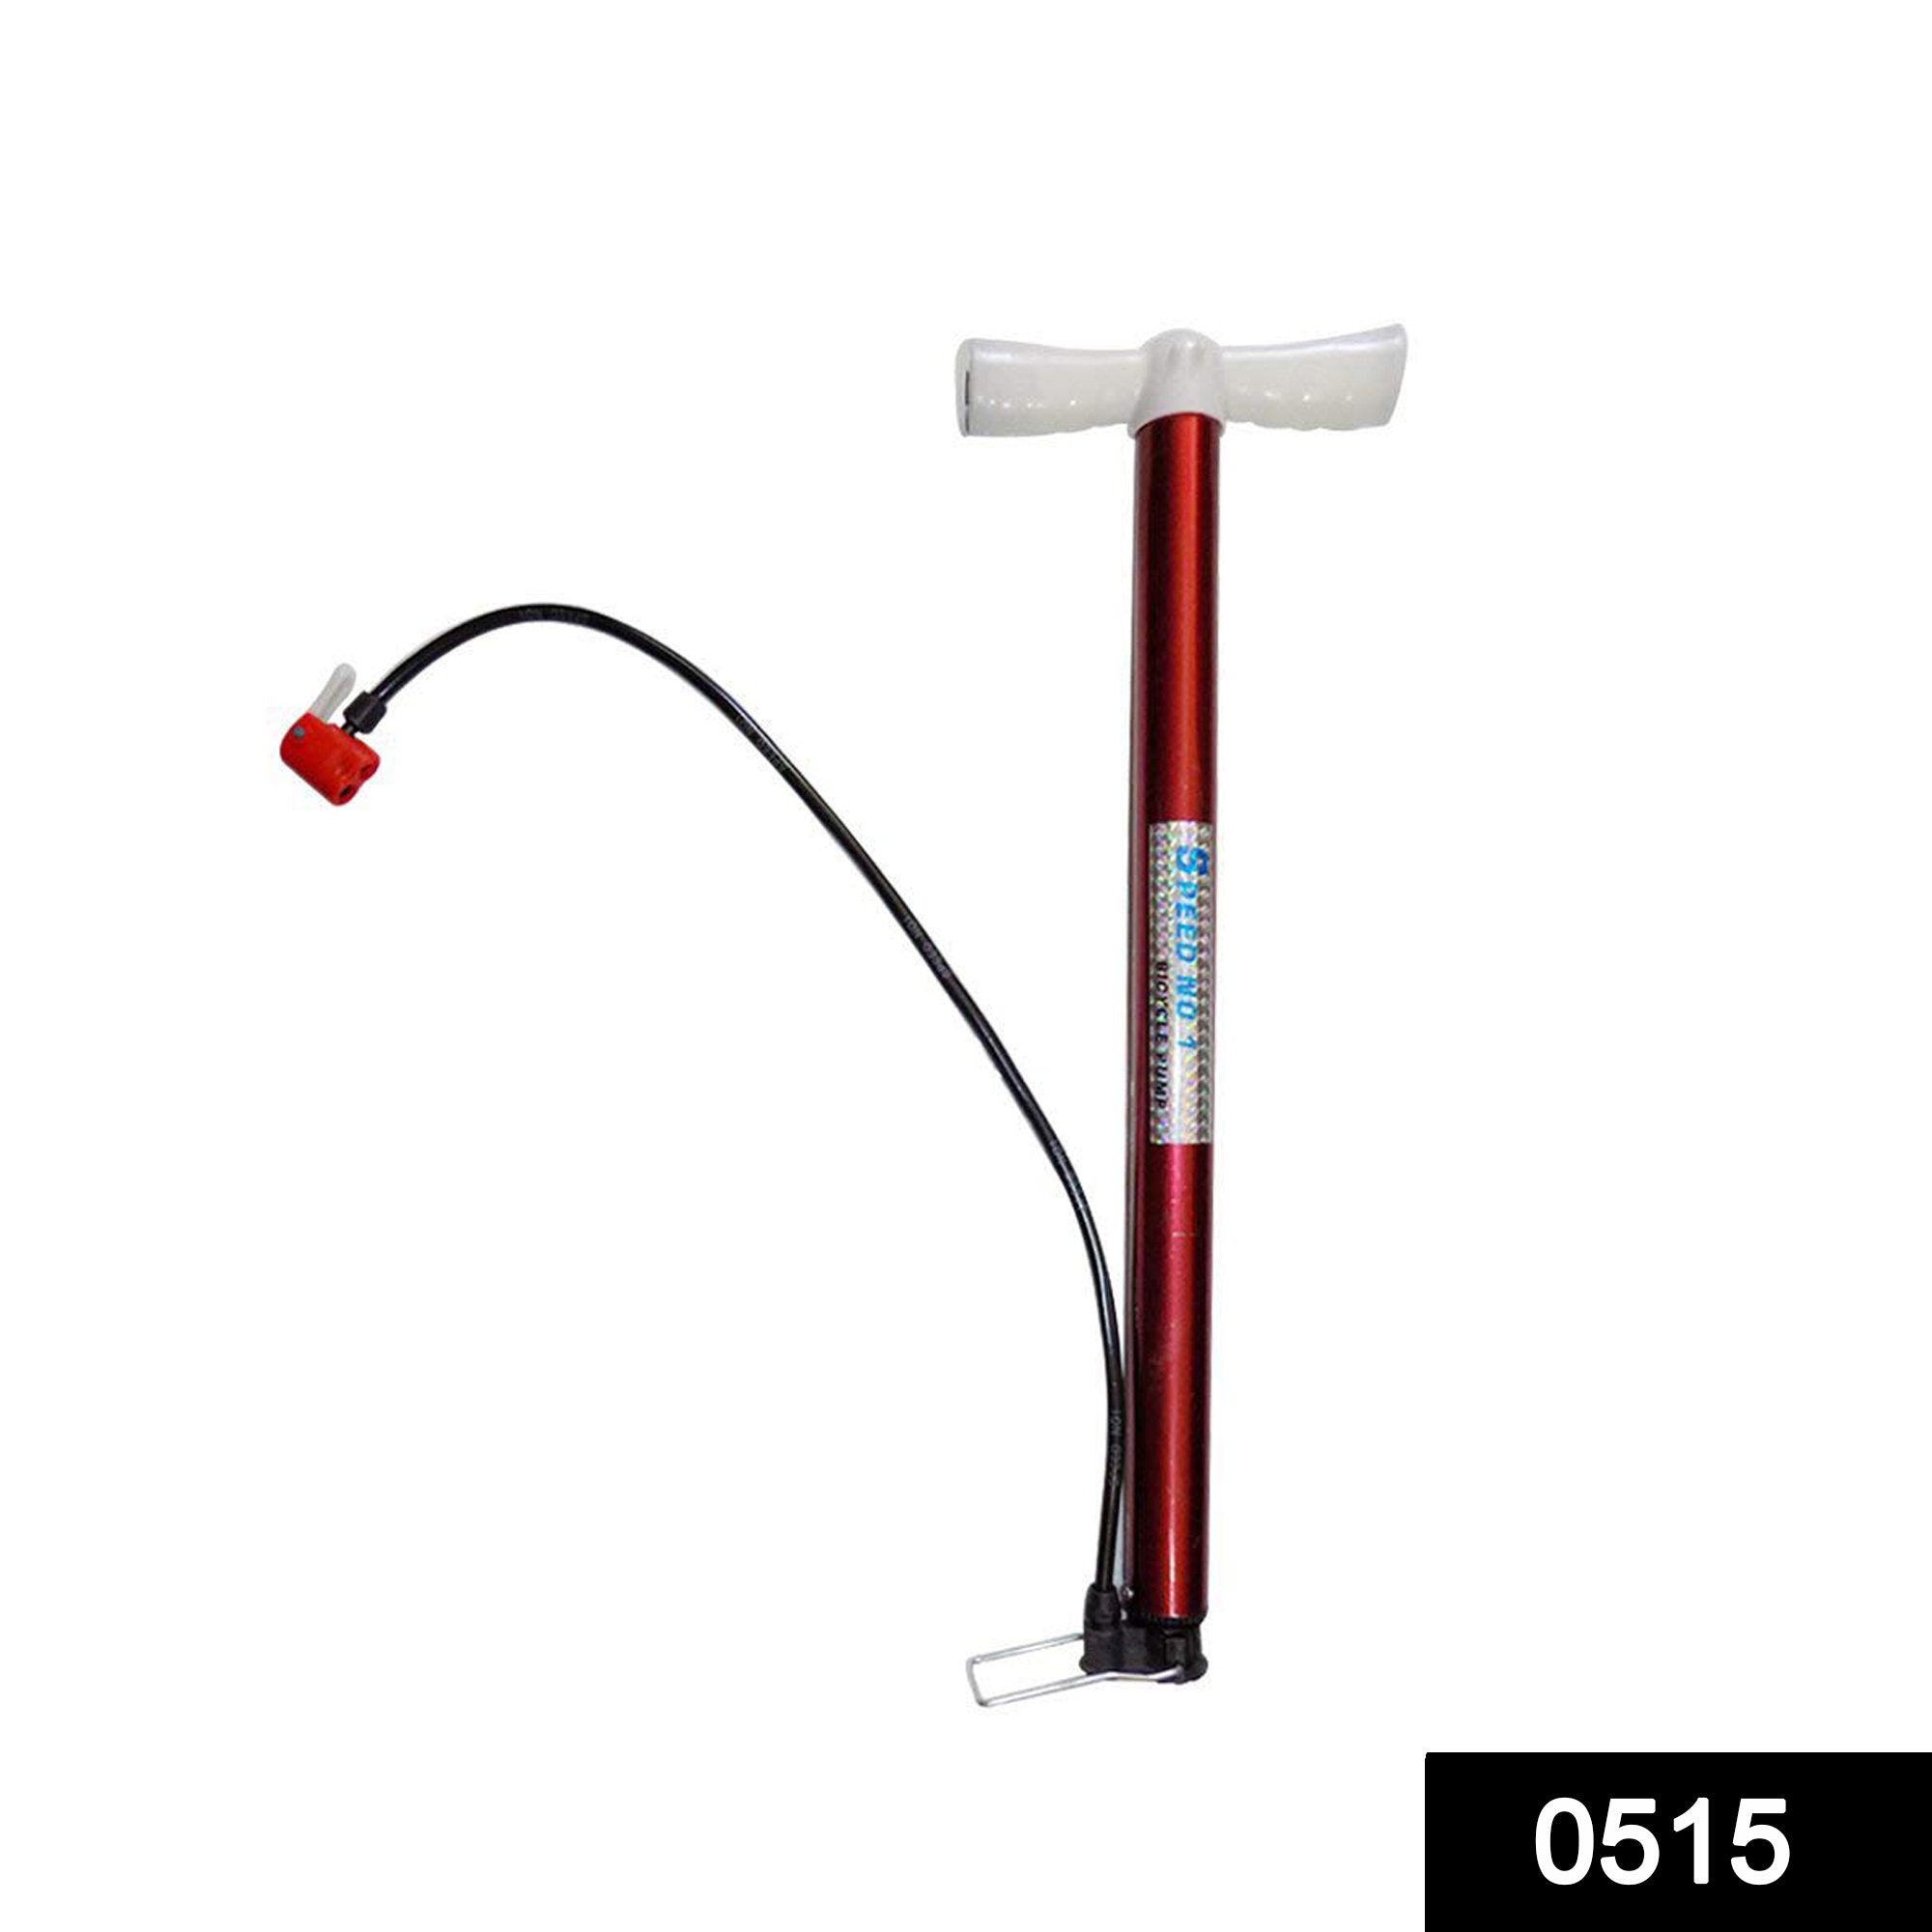 high pressure deluxe strong steel air pump for bicycle car ball motorcycle